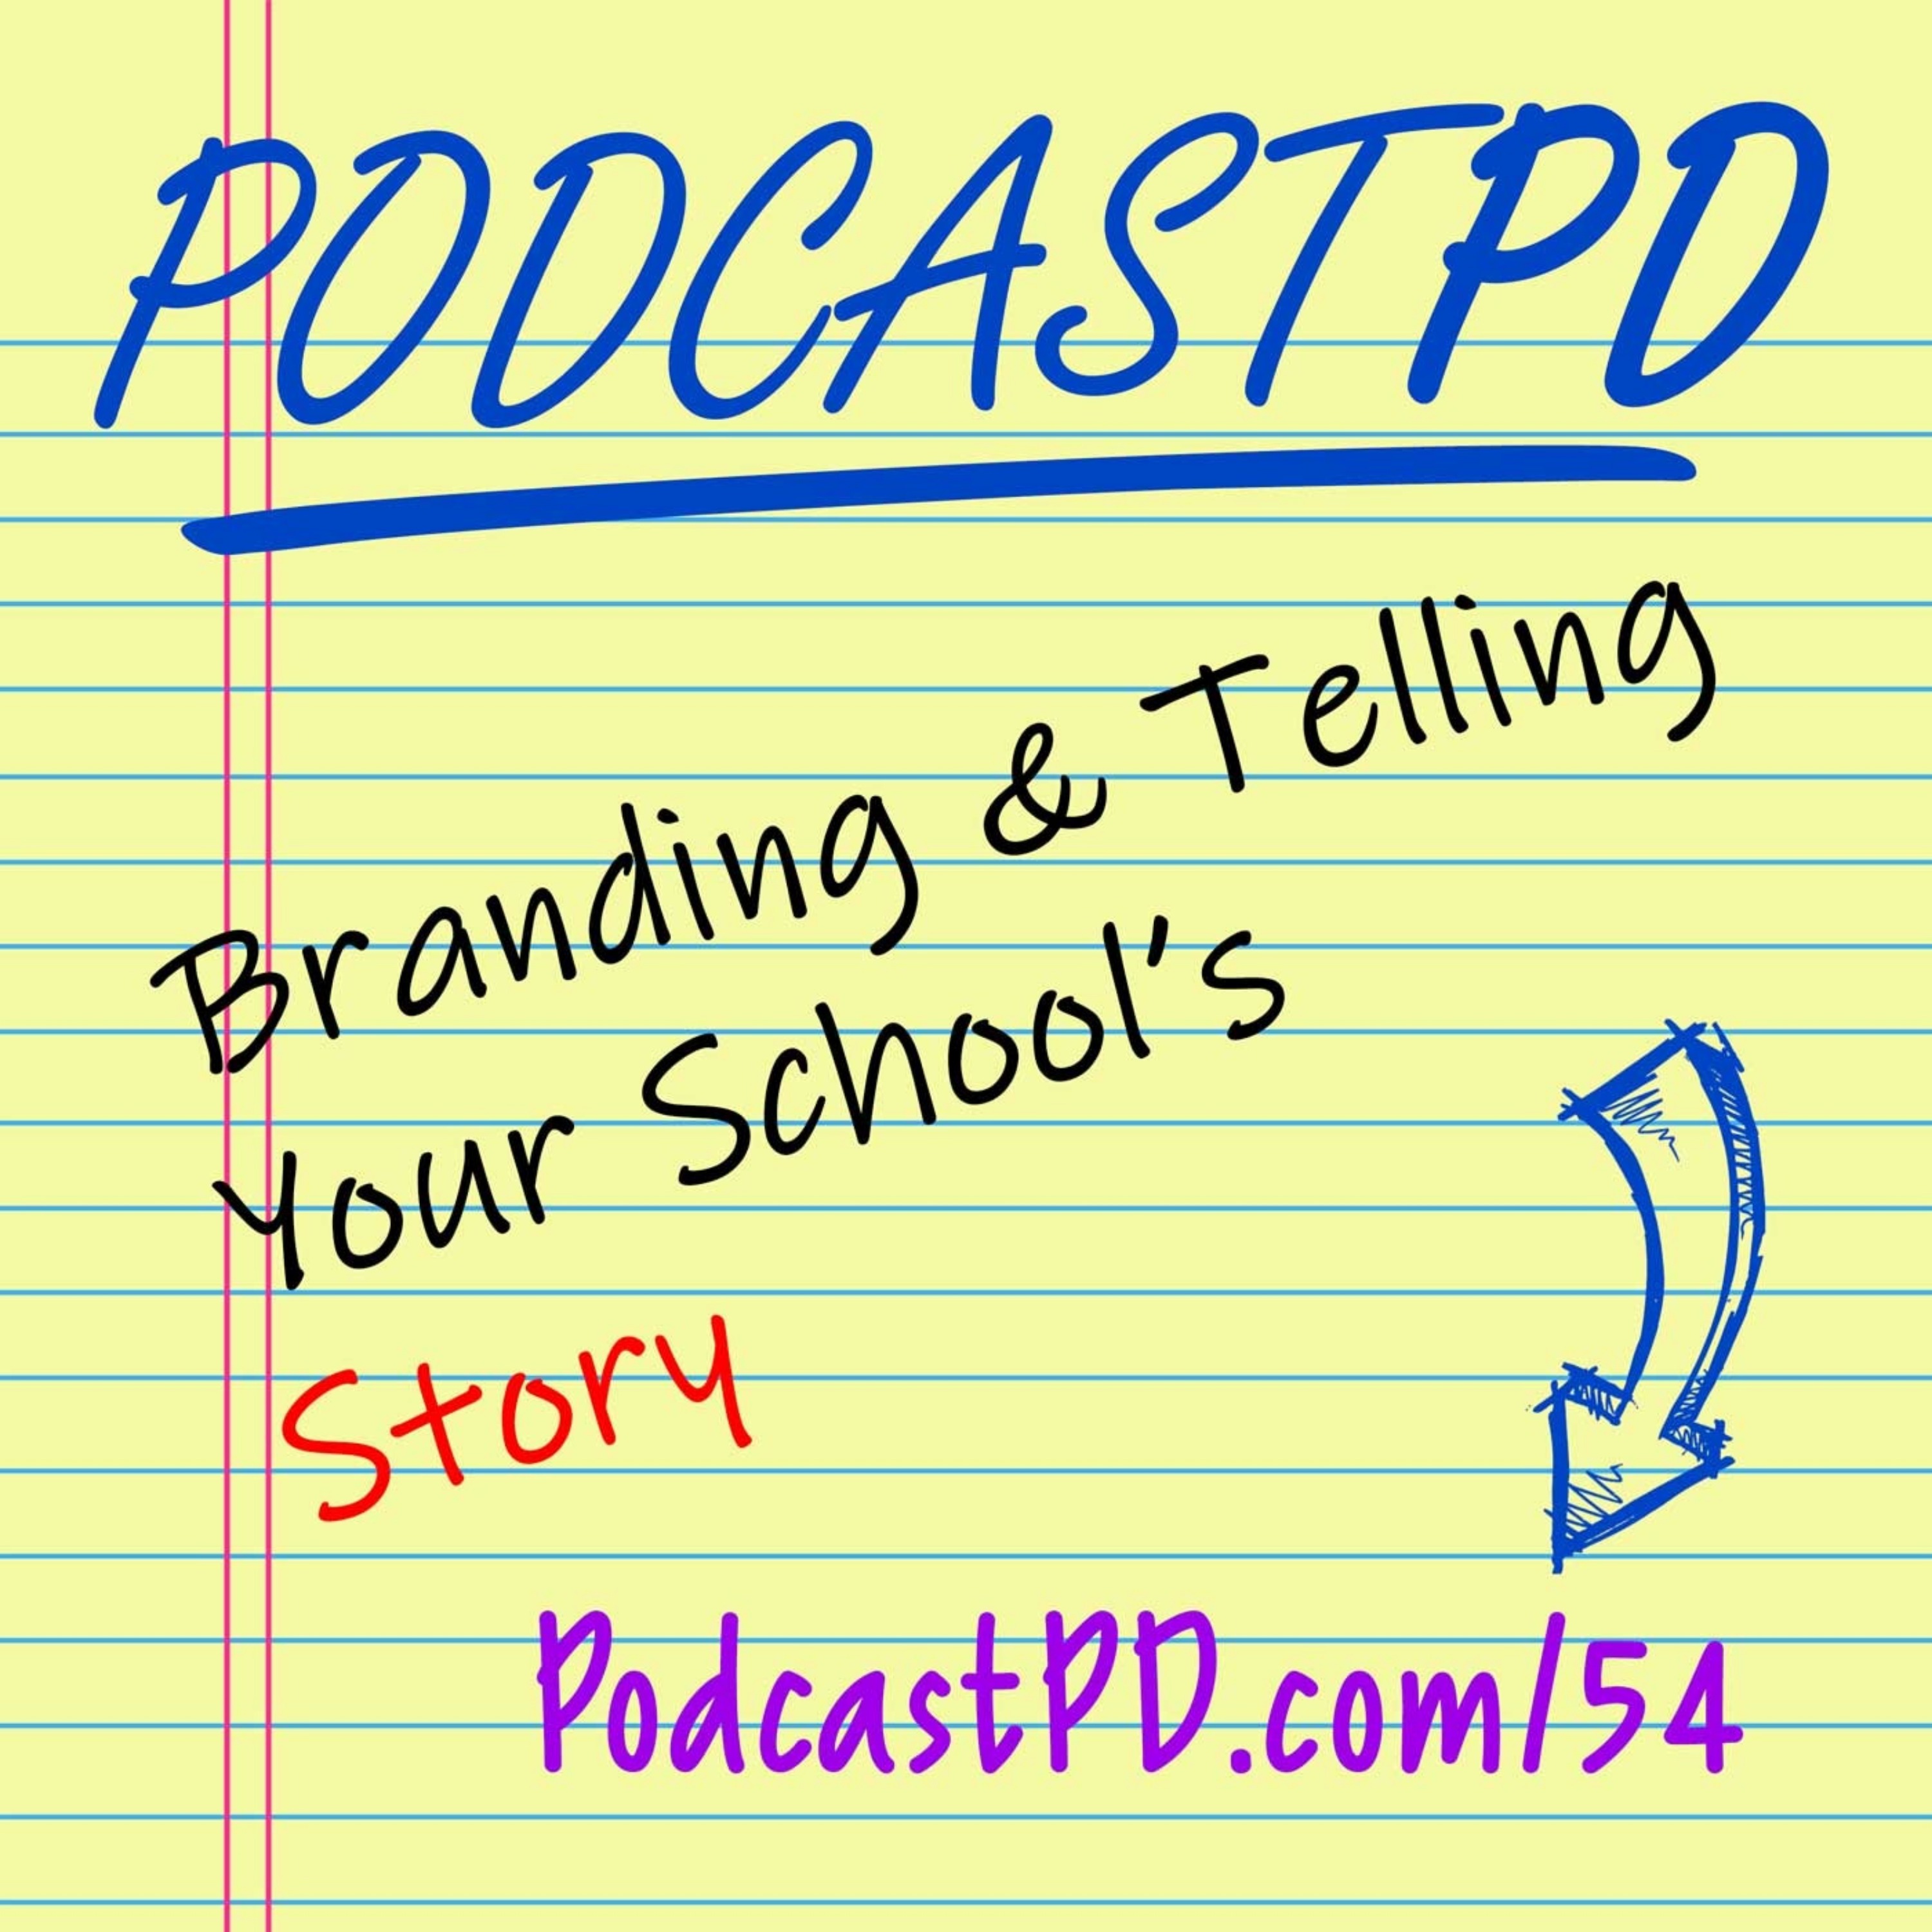 Building a Brand and Telling Your School's Story - PPD054 Image